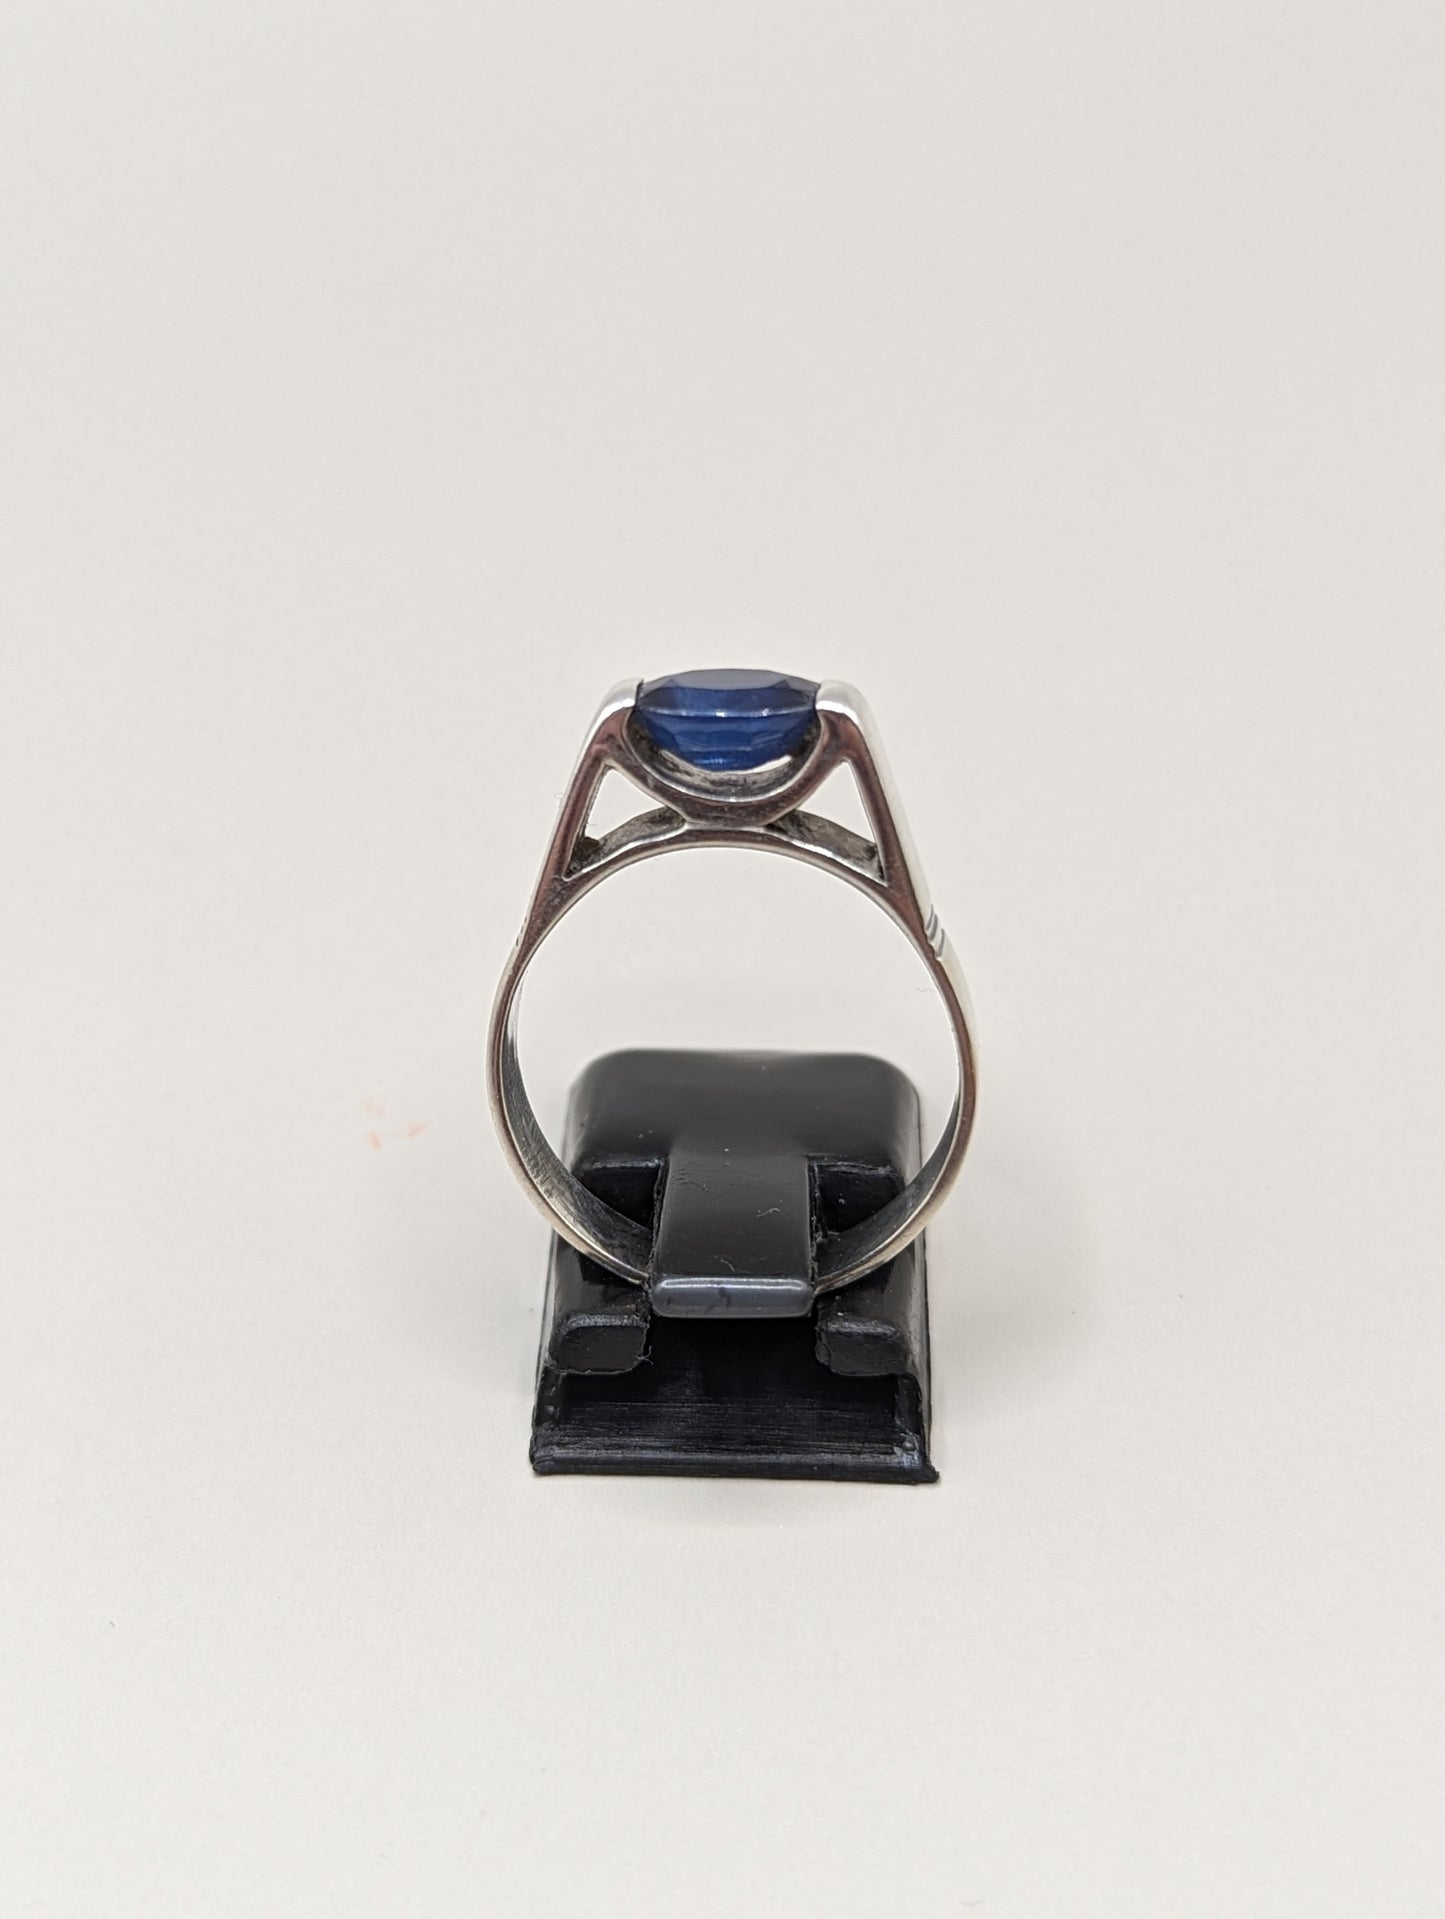 Vintage Sterling Silver Ring with Blue Stone, UK Size P1/2